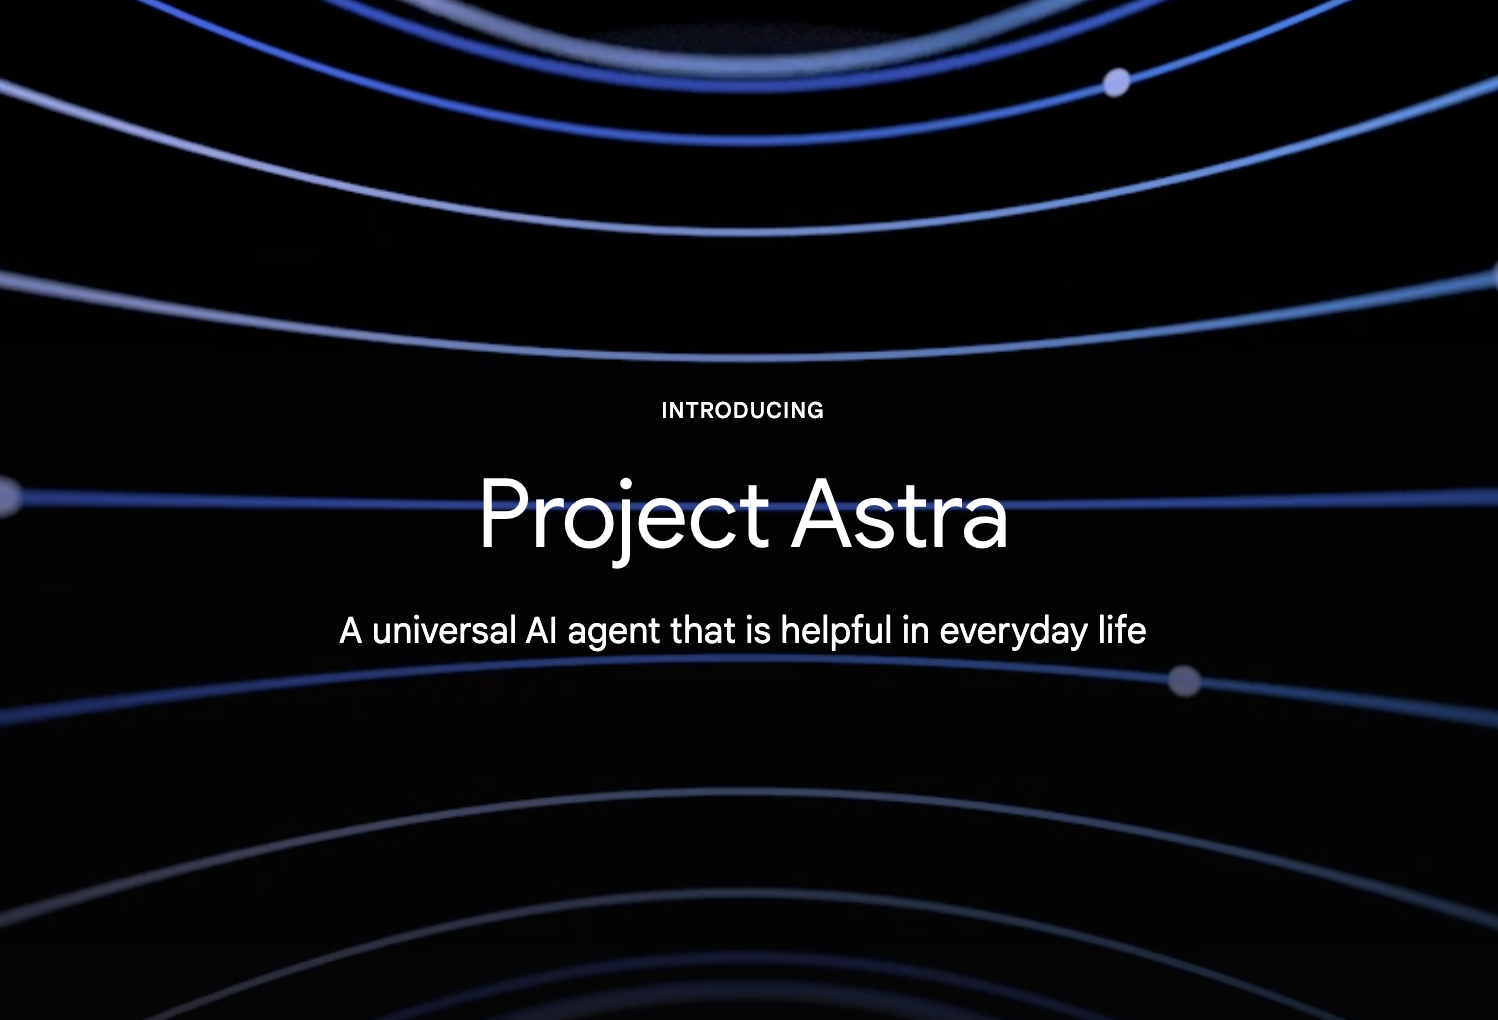 Google Project Astra